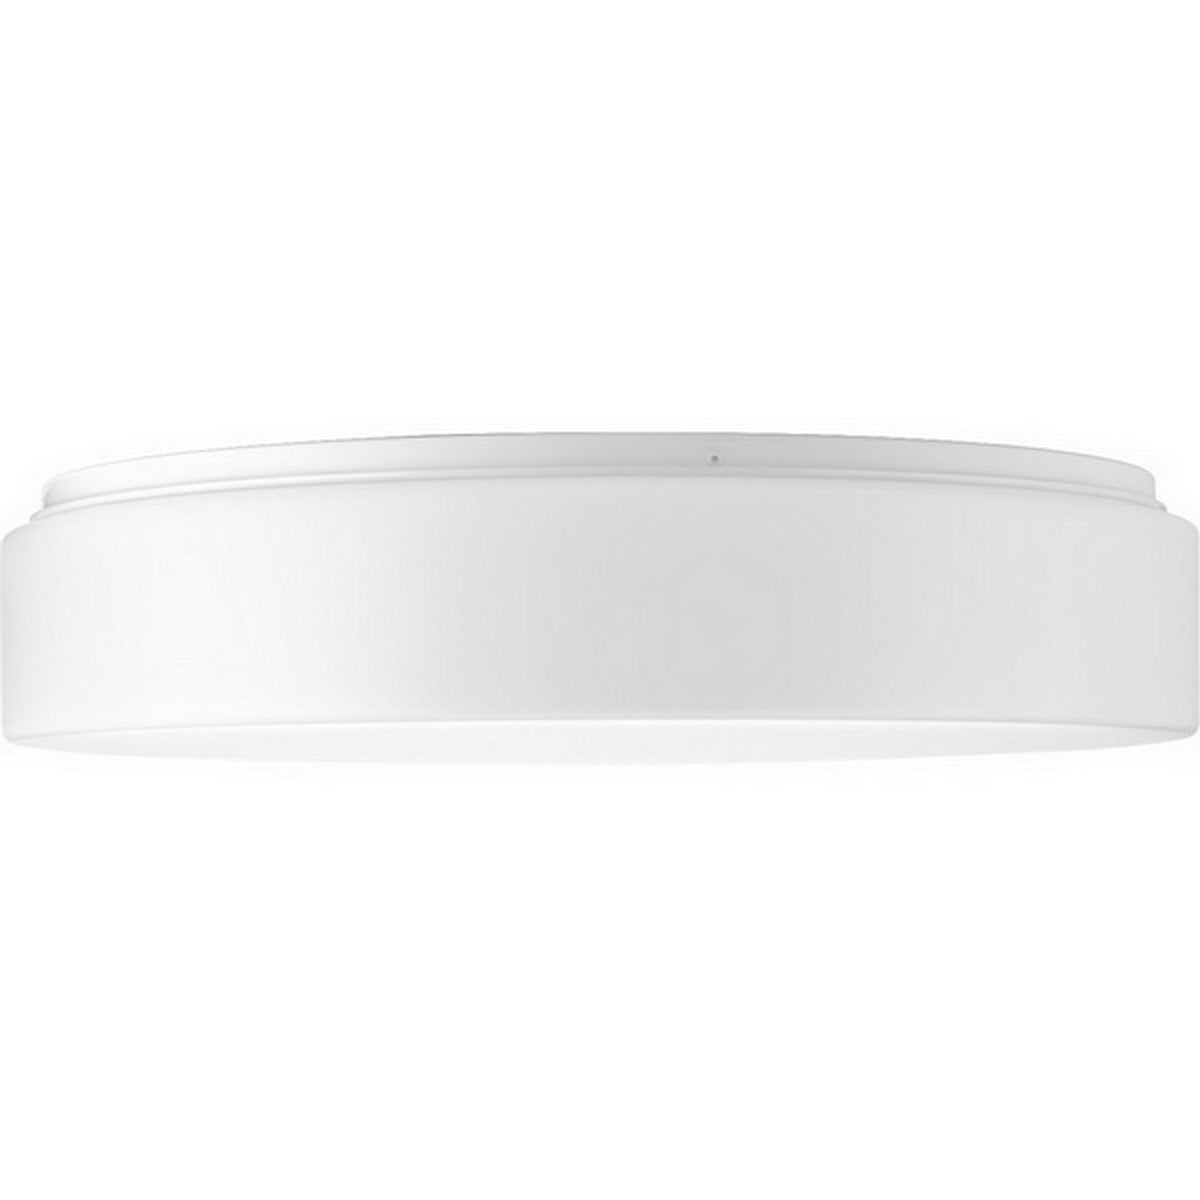 Drums and Clouds 17 in LED Flush Mount Light White finish